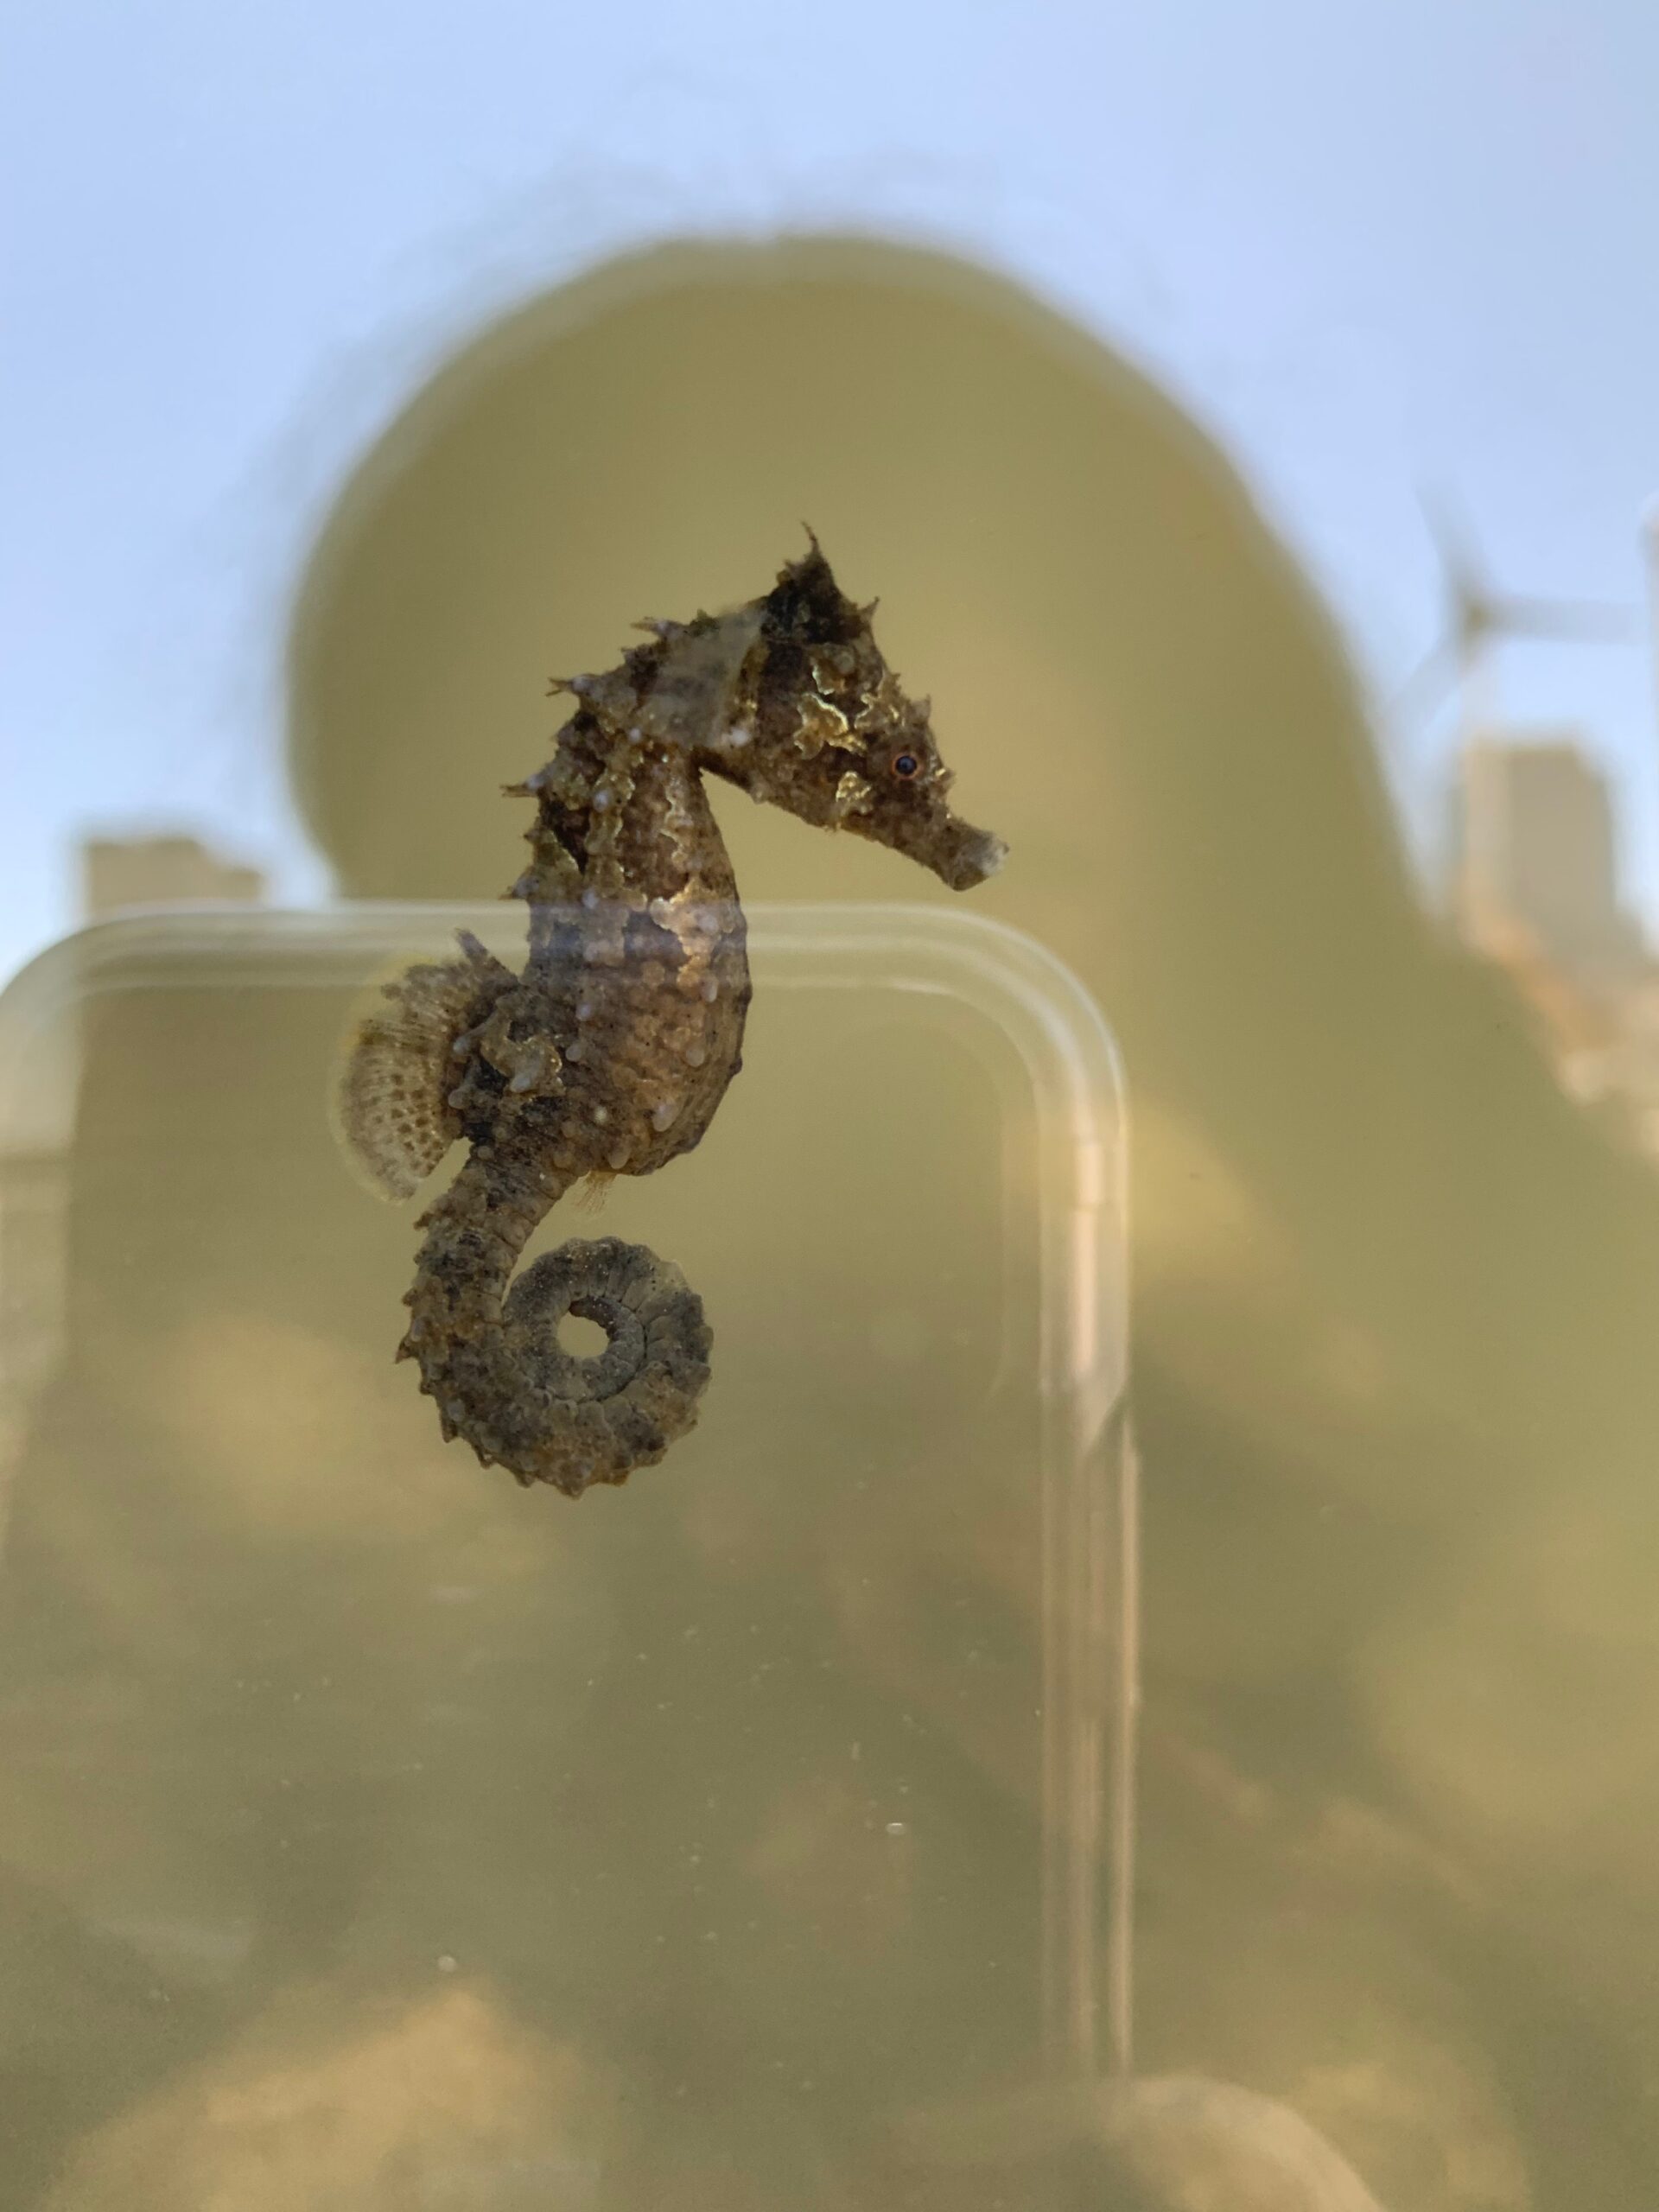 A close up view of the lined seahorse with its tail curled up